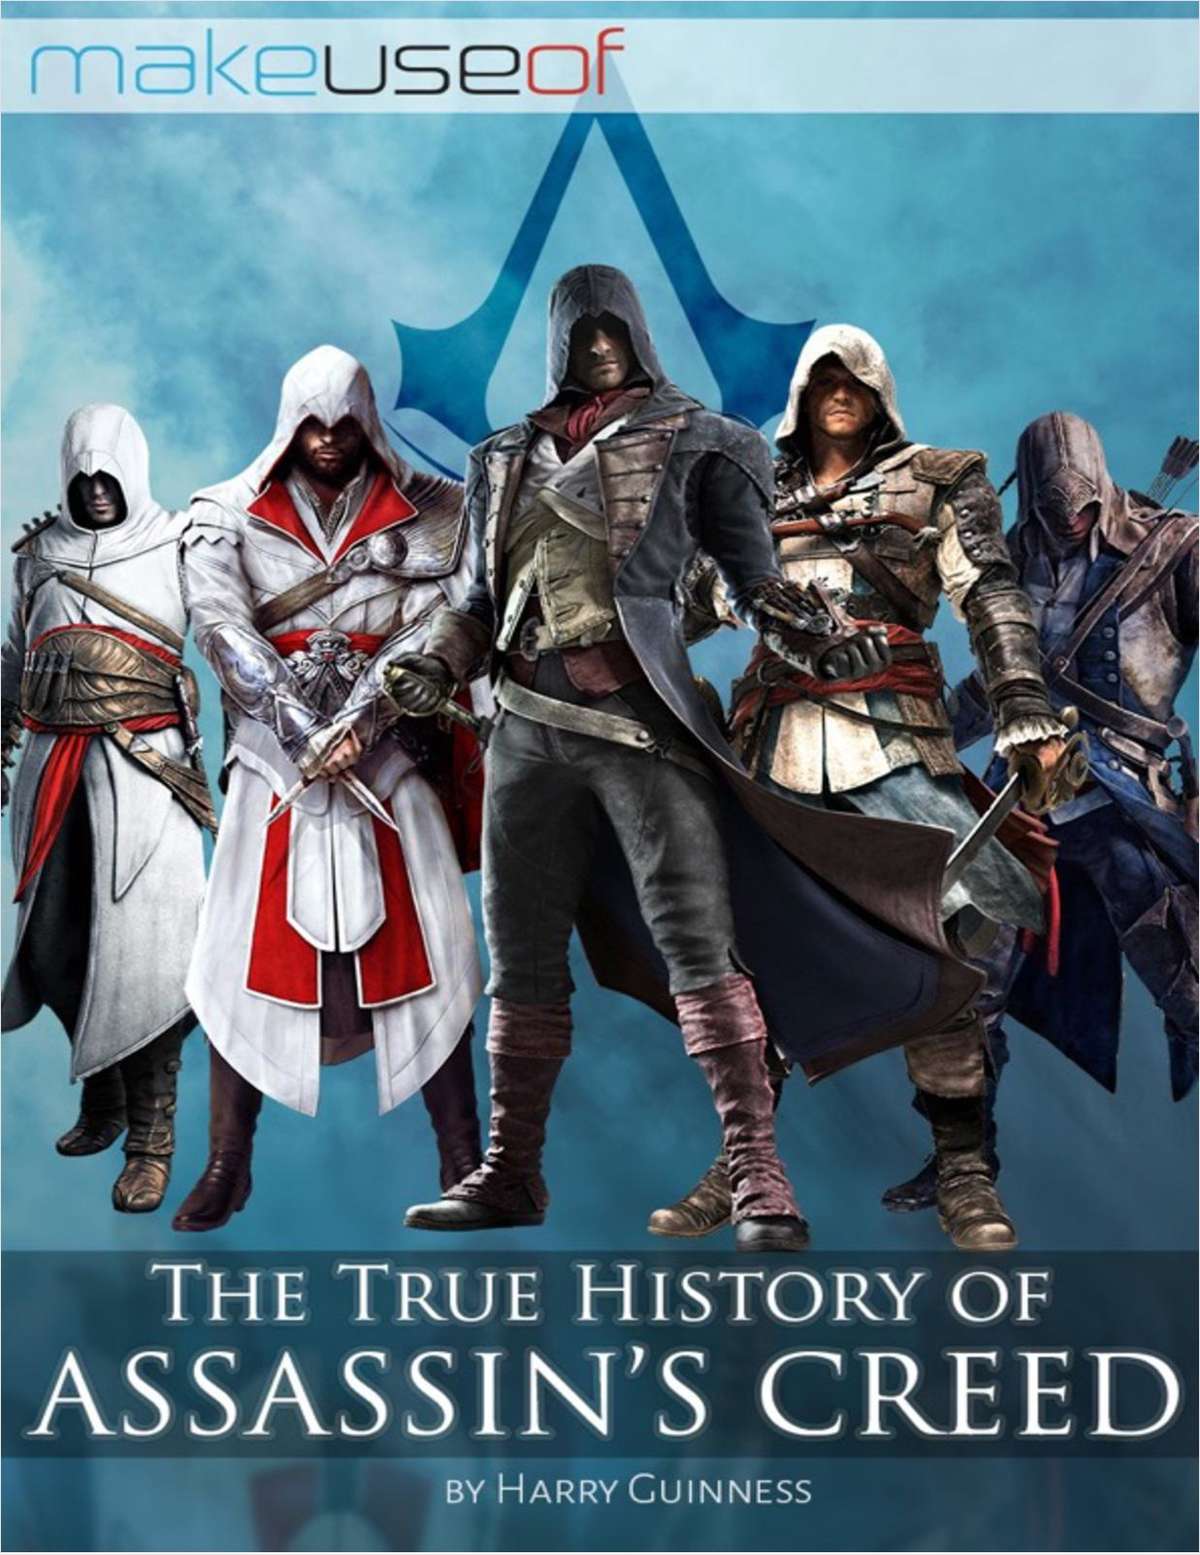 The True History of Assassin's Creed